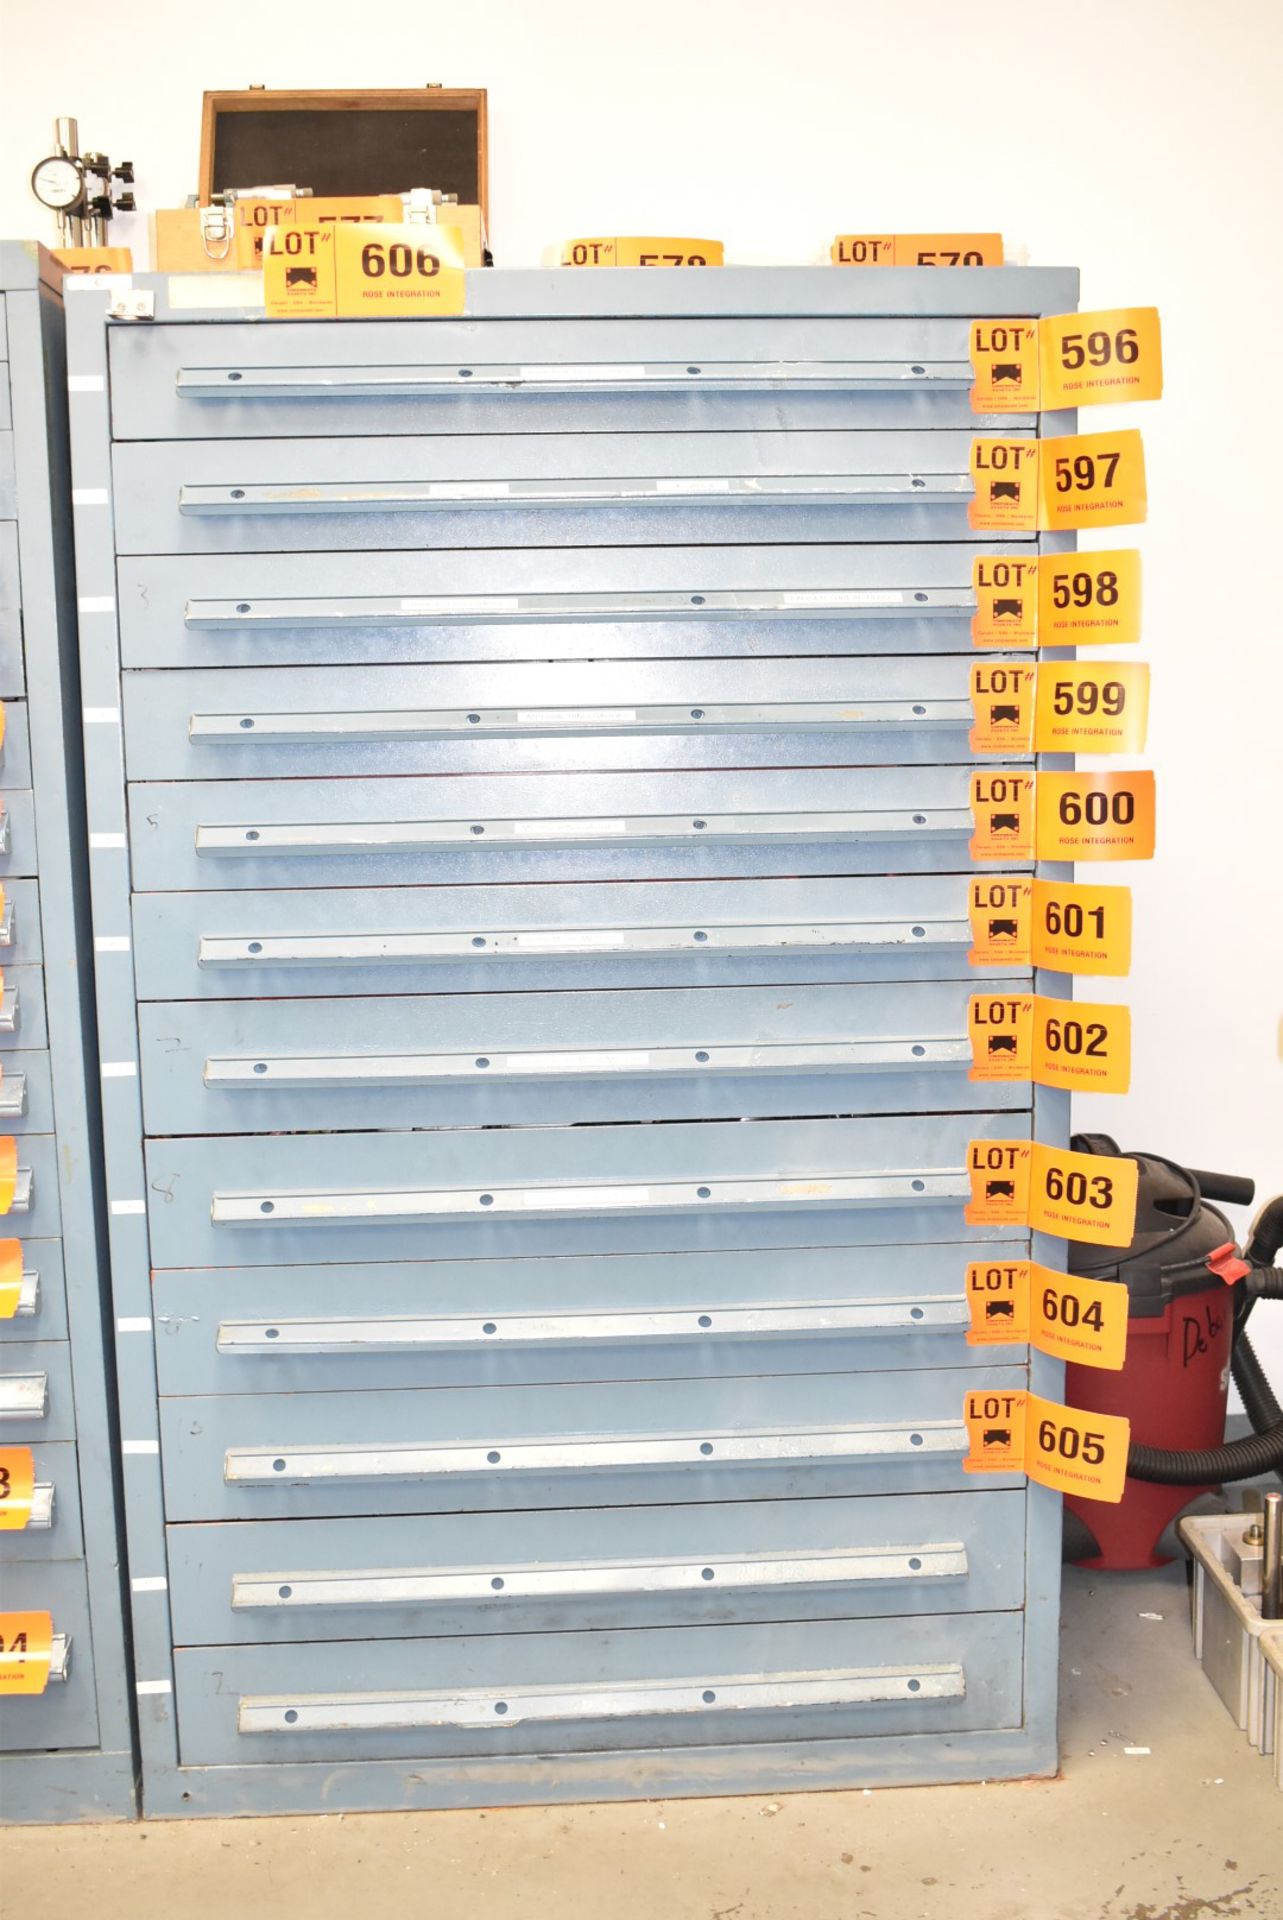 12-DRAWER TOOL CABINET, S/N N/A (NO CONTENTS - DELAYED DELIVERY)